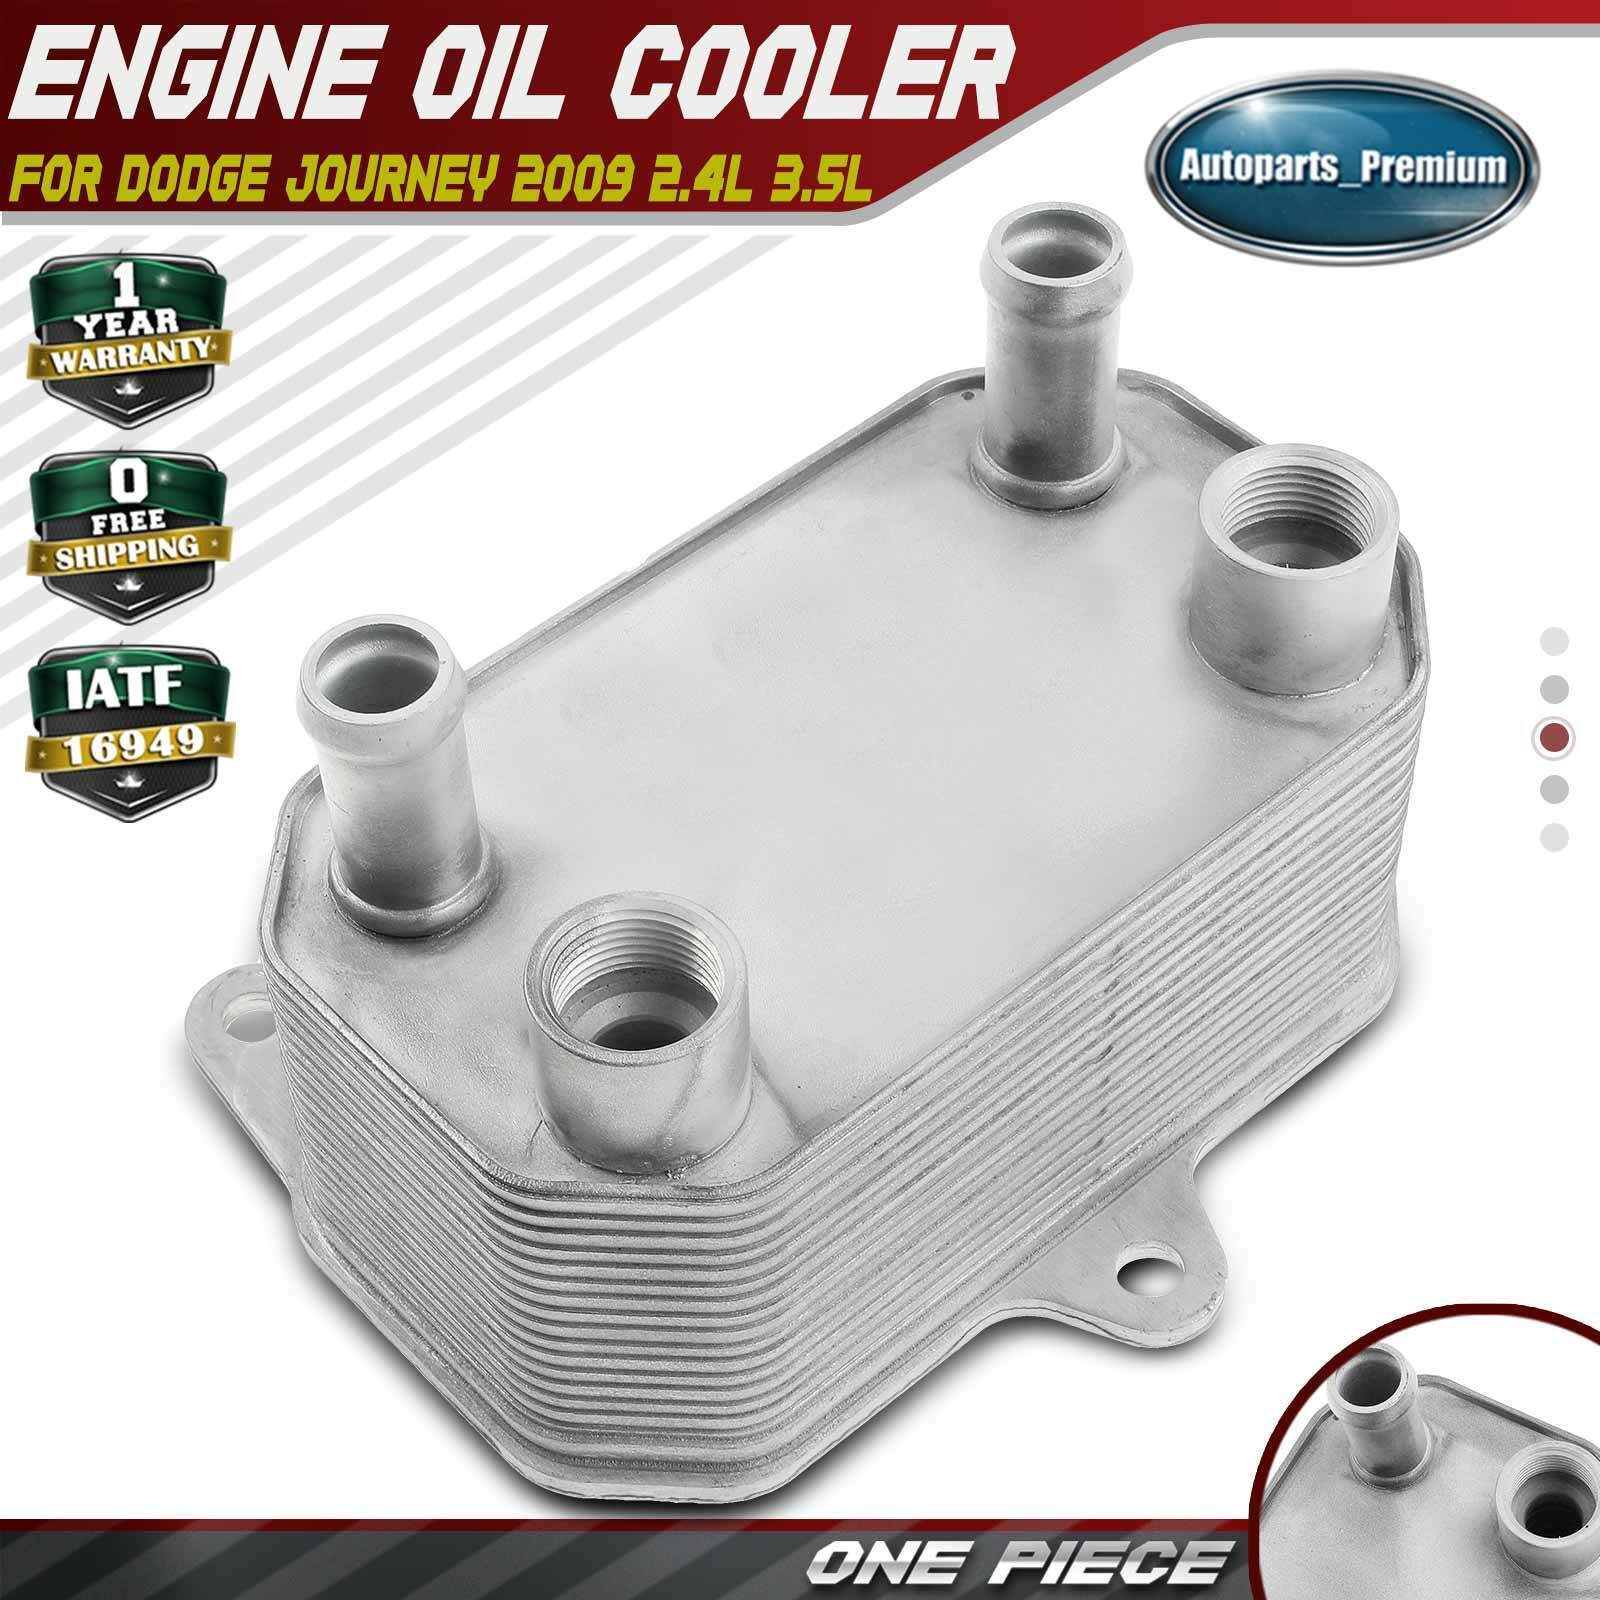 Engine Oil Cooler for Dodge Journey 2009 2.4L 3.5L Naturally Aspirated 4892368AD